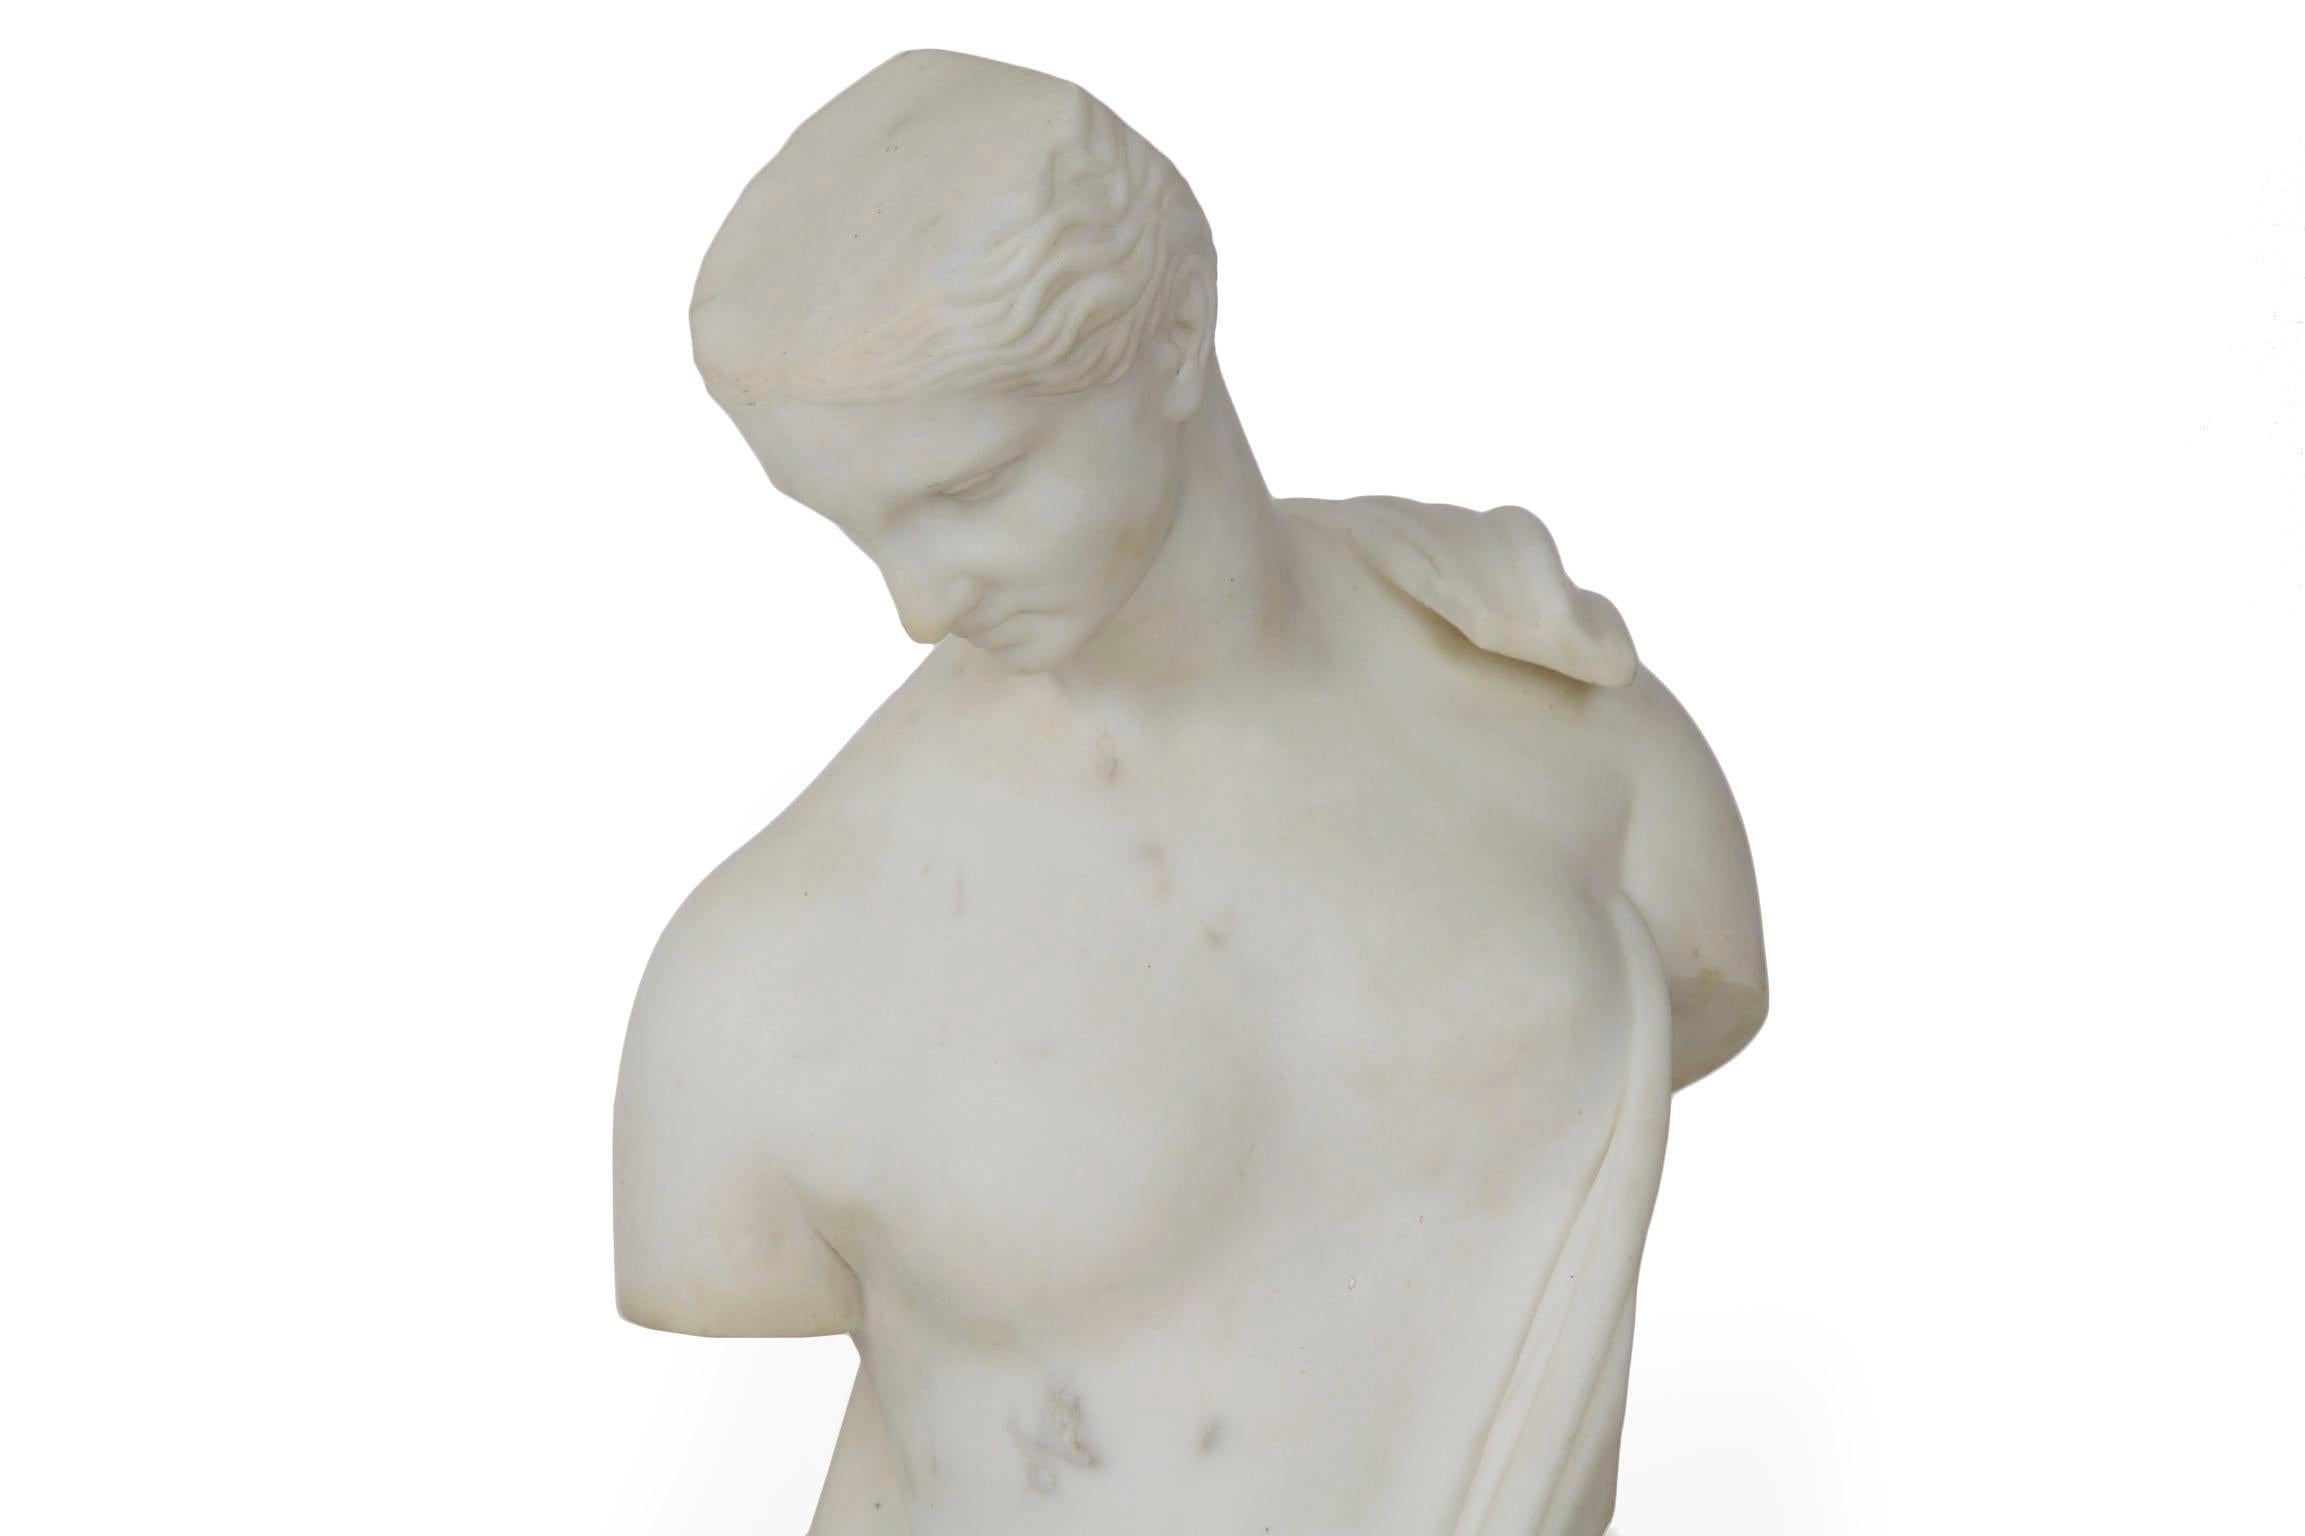 A finely chiseled marble sculpture of a goddess draped in a loose garb, it is signed in script T. Vacca along the side and dated 1866. The original was found in the amphitheater of Capua in Italy during the 18th century, the sculpture is believed to